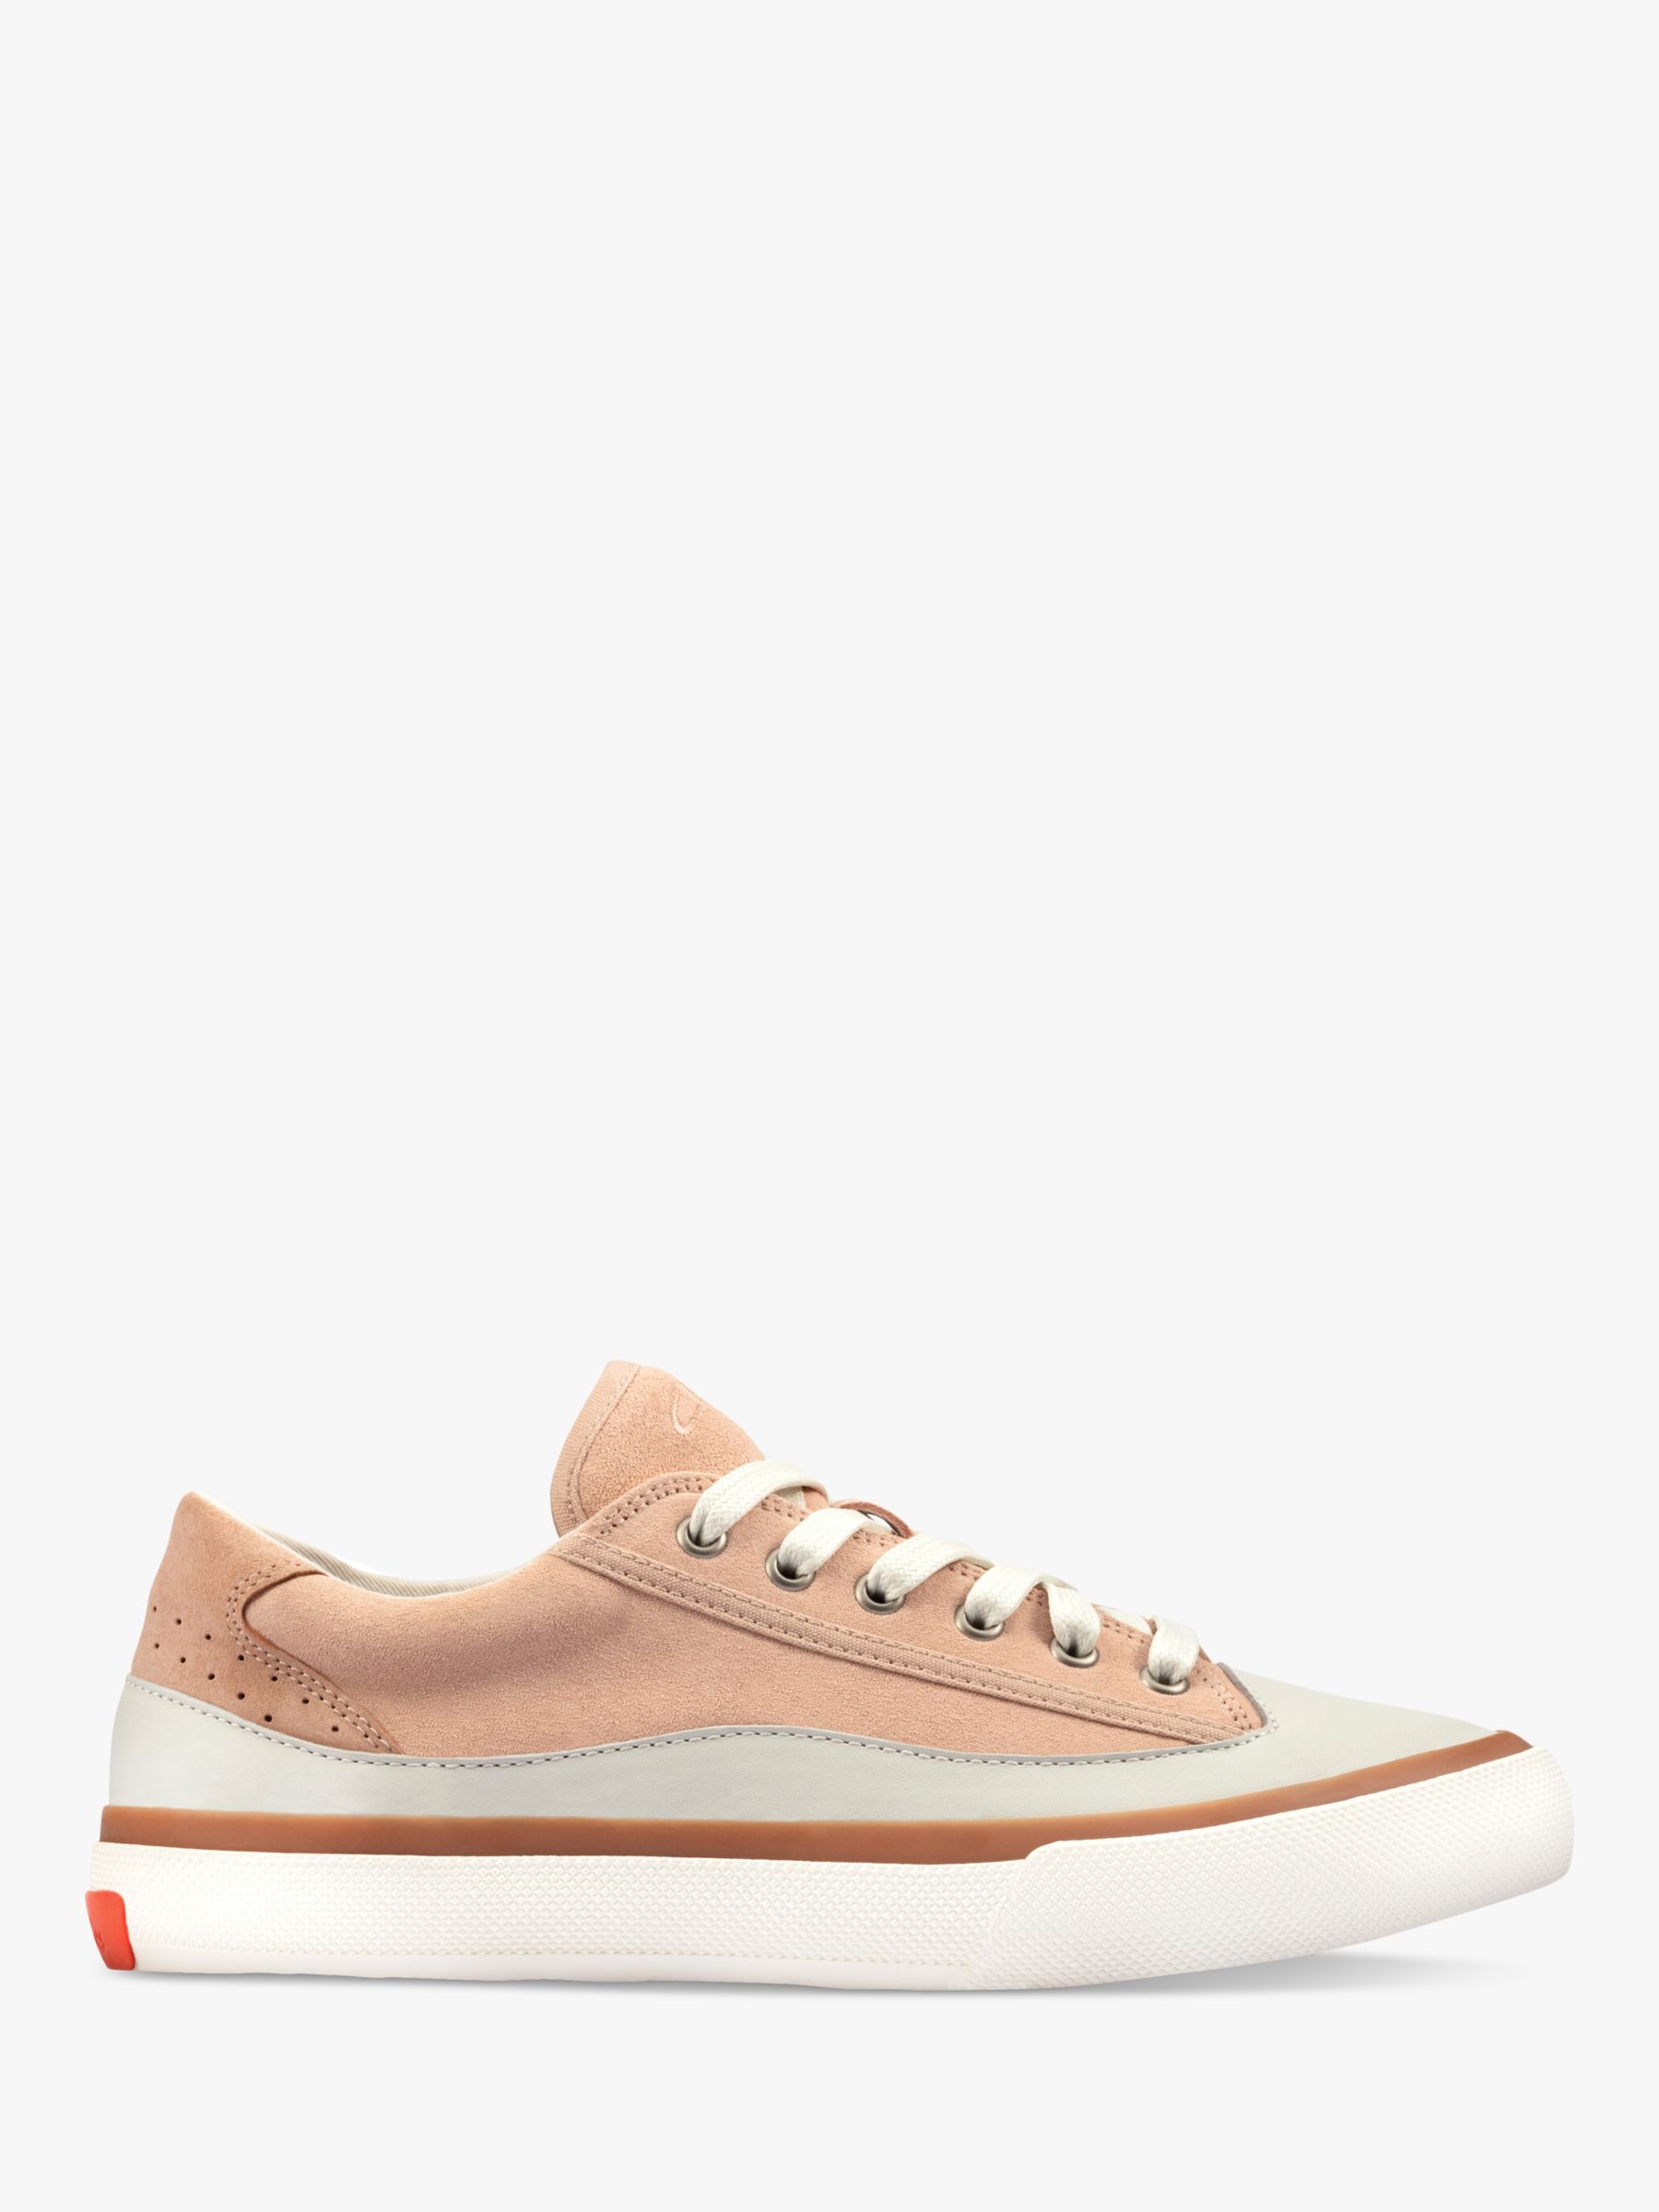 Clarks Aceley Suede Lace Up Trainers, Light Pink at John Lewis & Partners